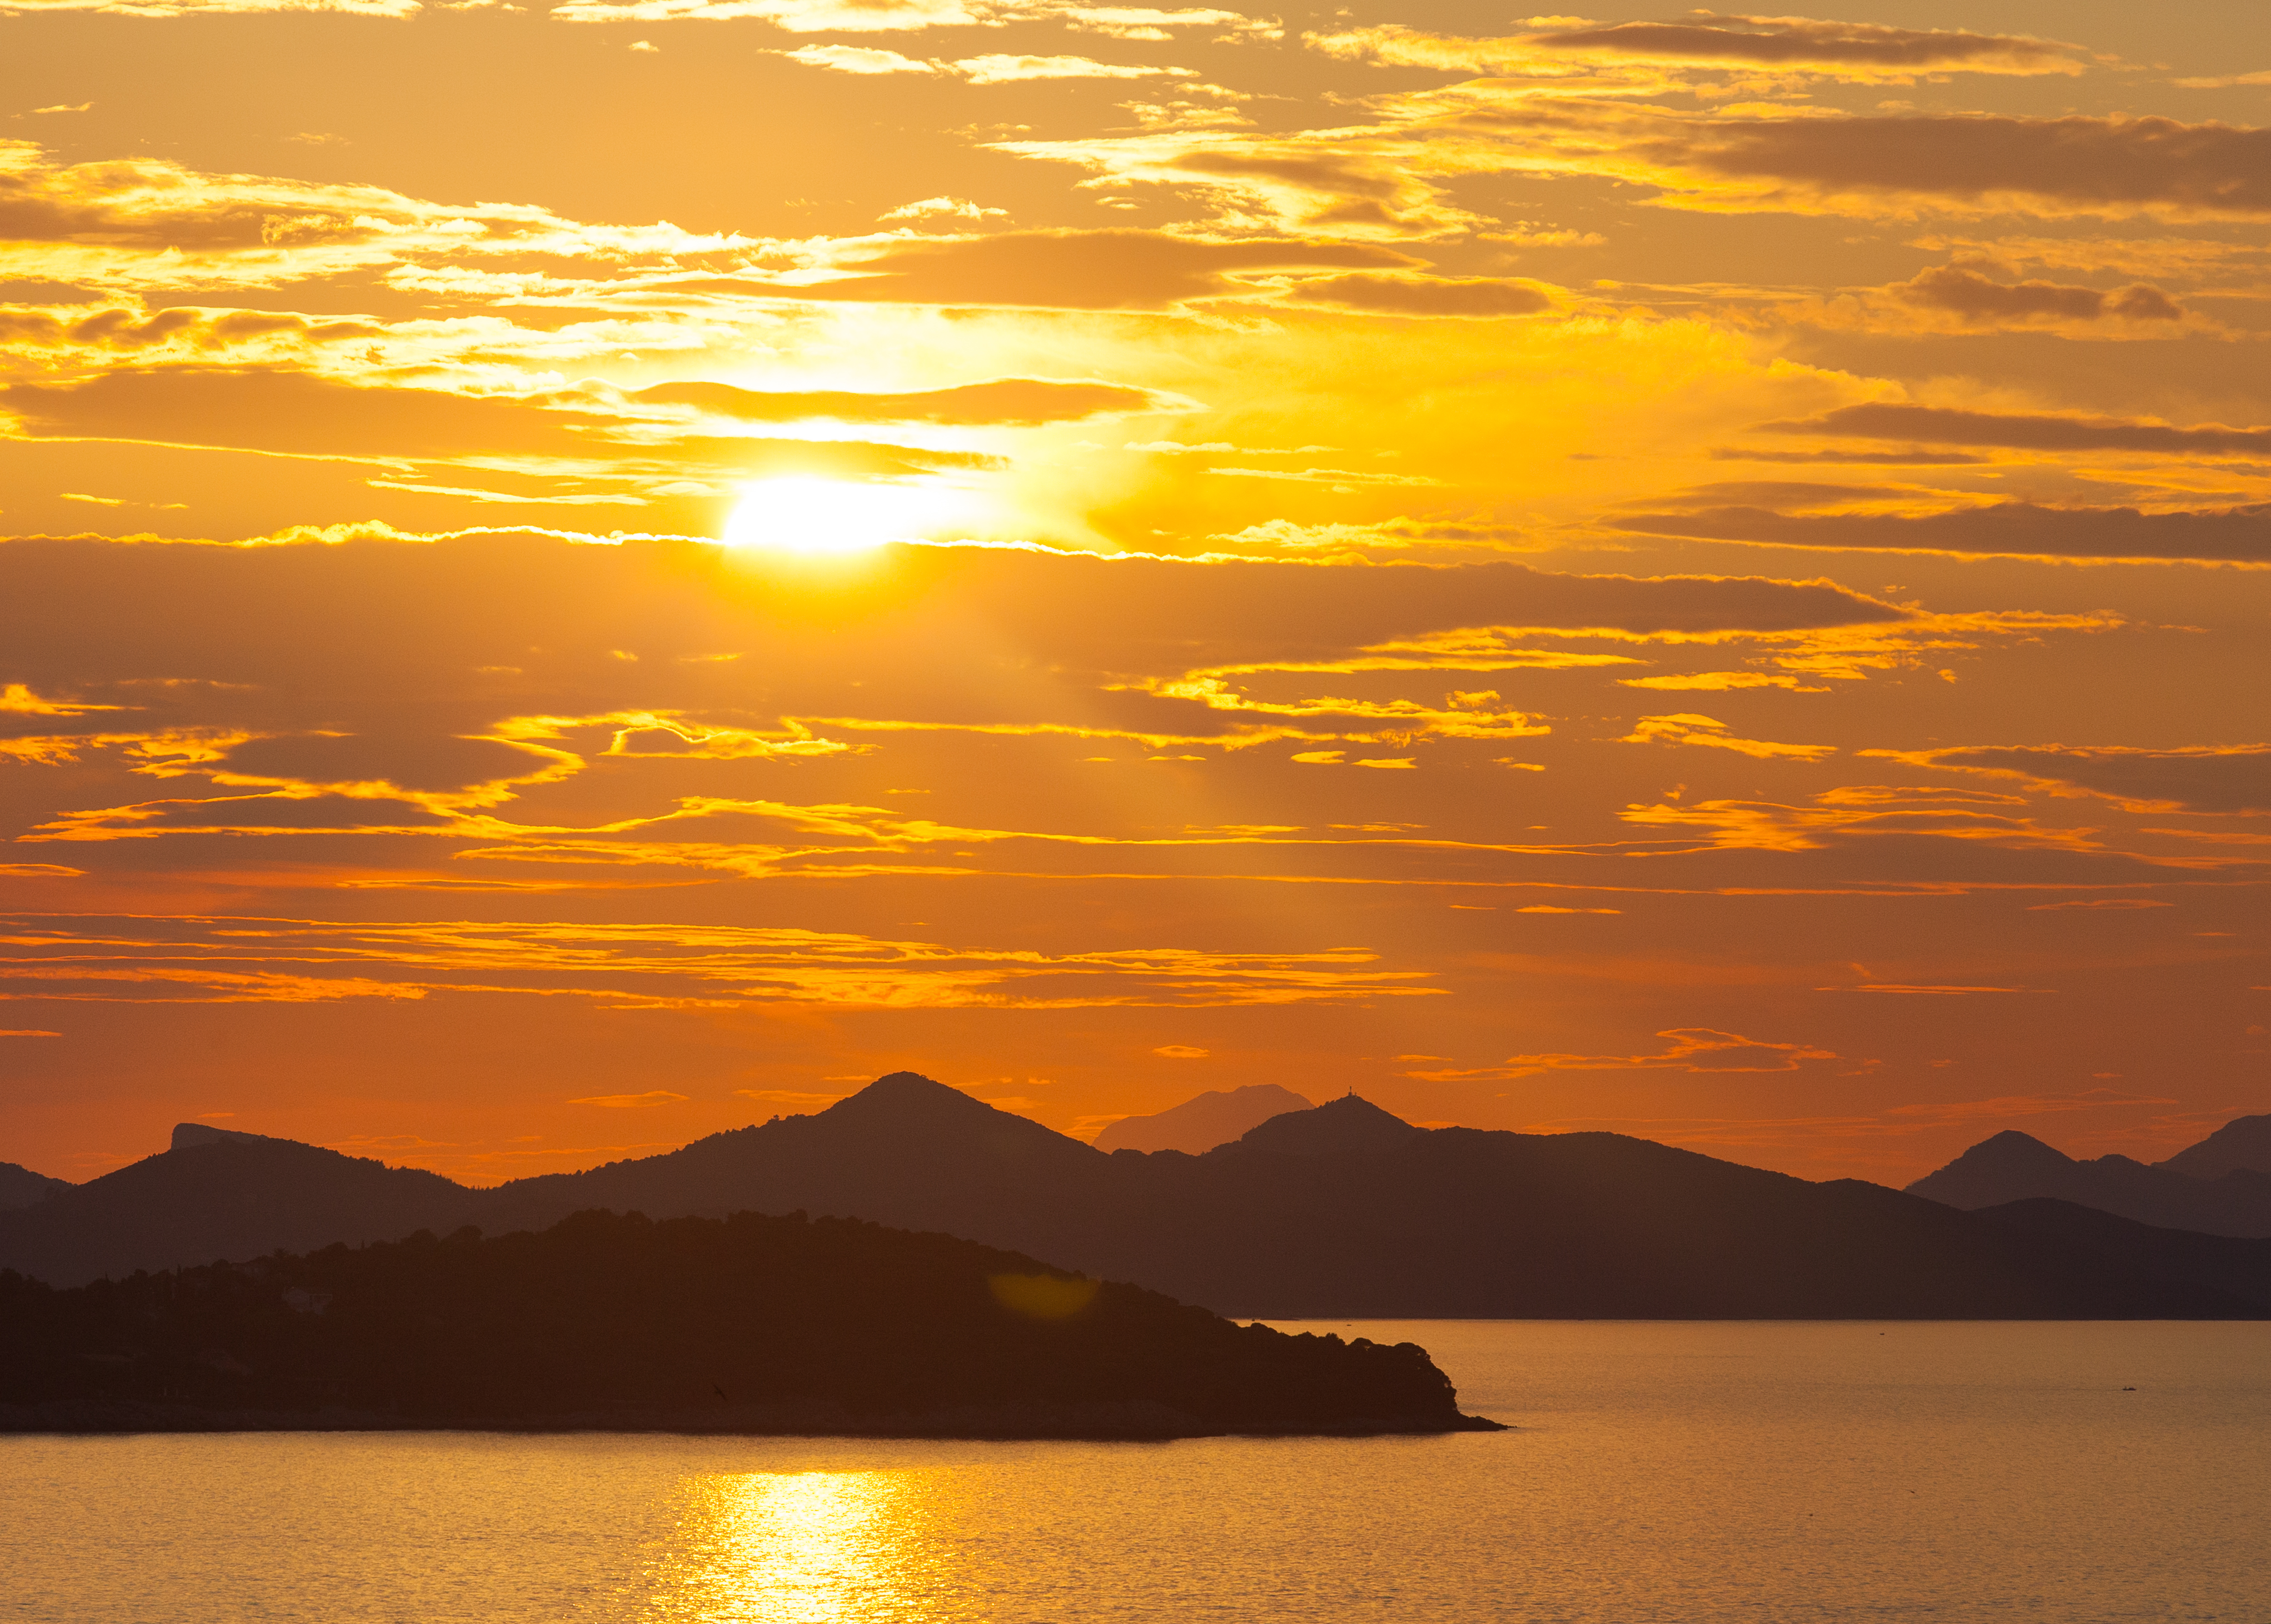 a creation of God - a sunset in Dubrovnik, Croatia, July 2014, picture 10